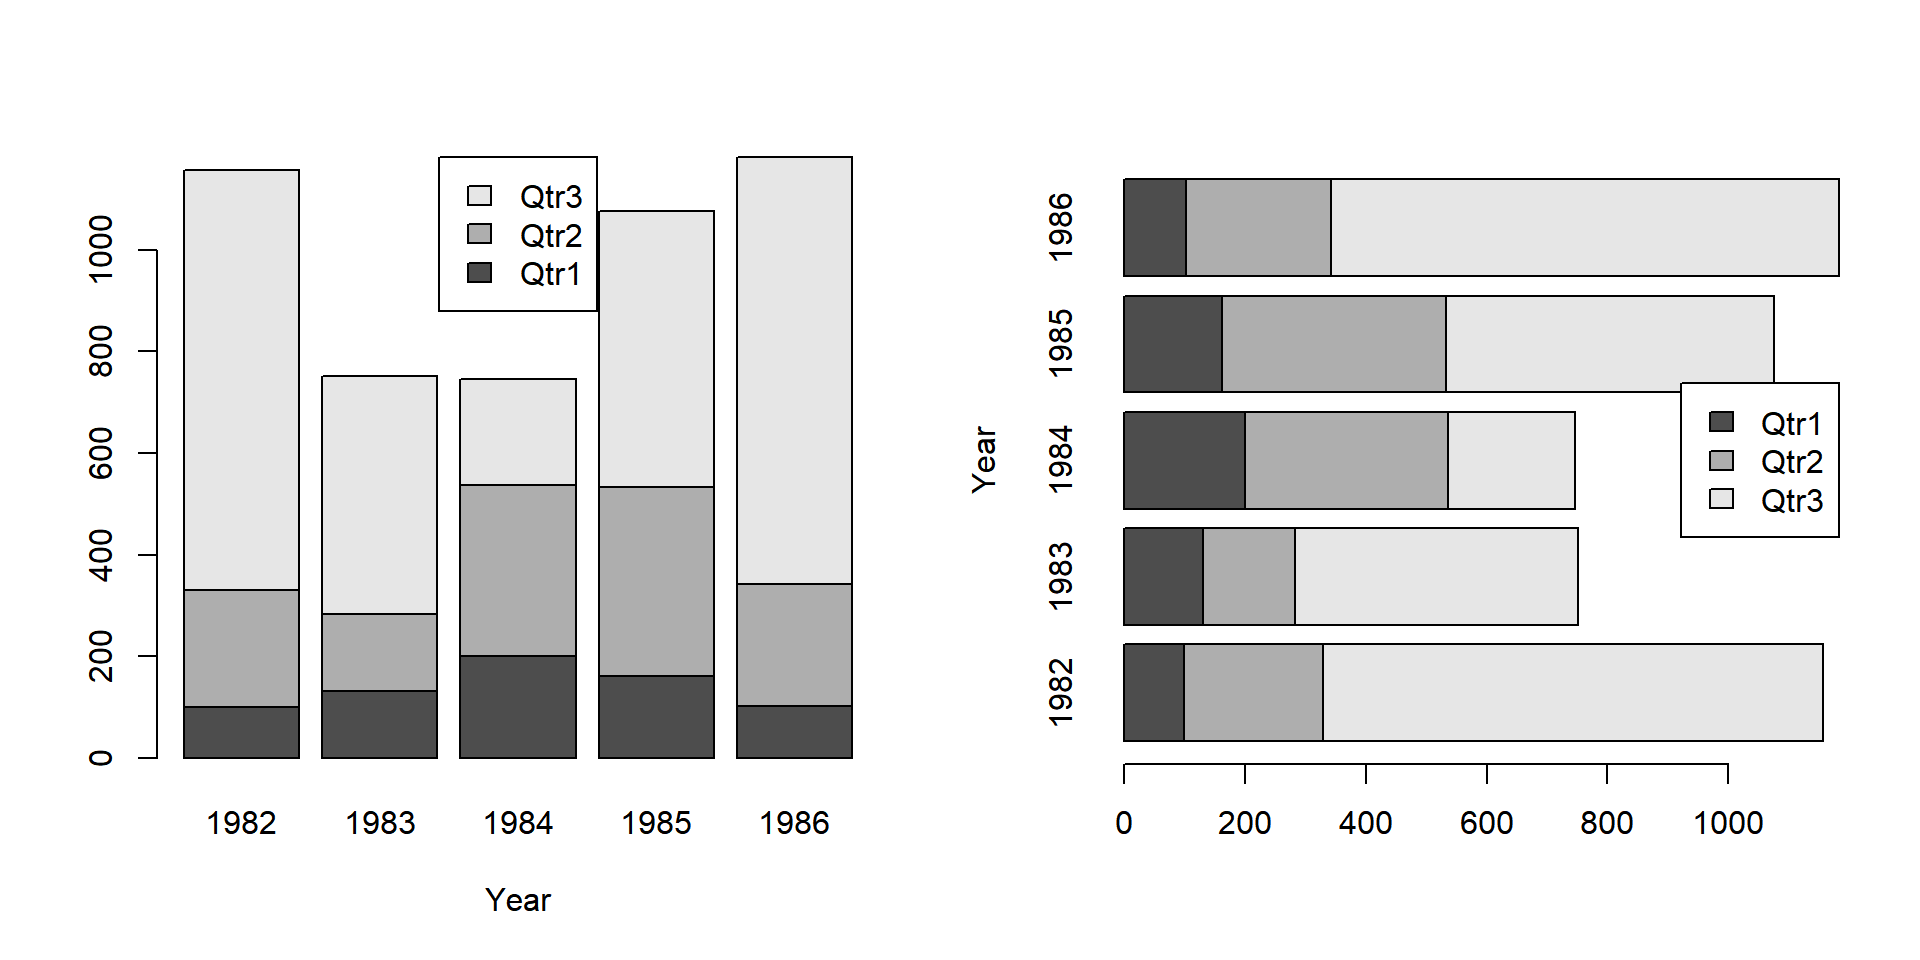 Create Stacked Bar Chart (Bar Plot) with Two or More Variables by One Variable (with Shifted Legend) in R